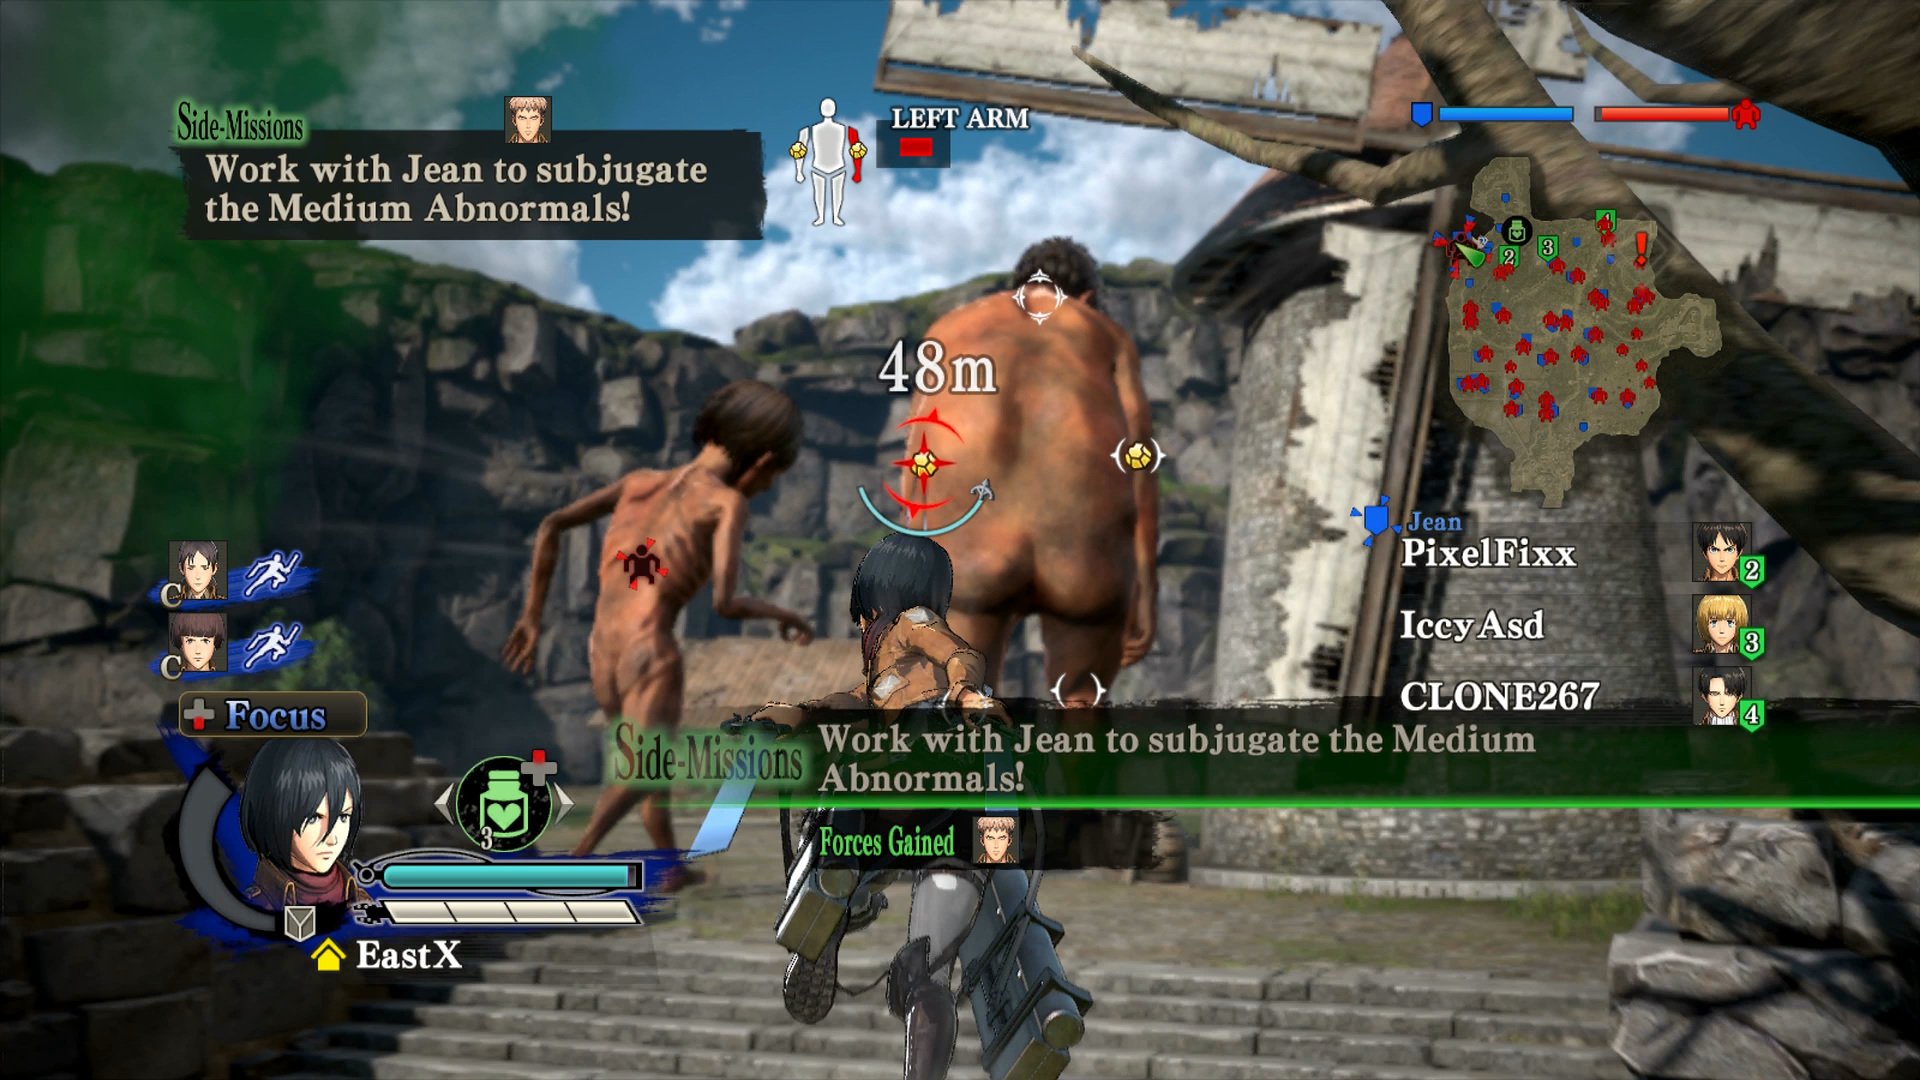 attack on titan wings of freedom xbox one